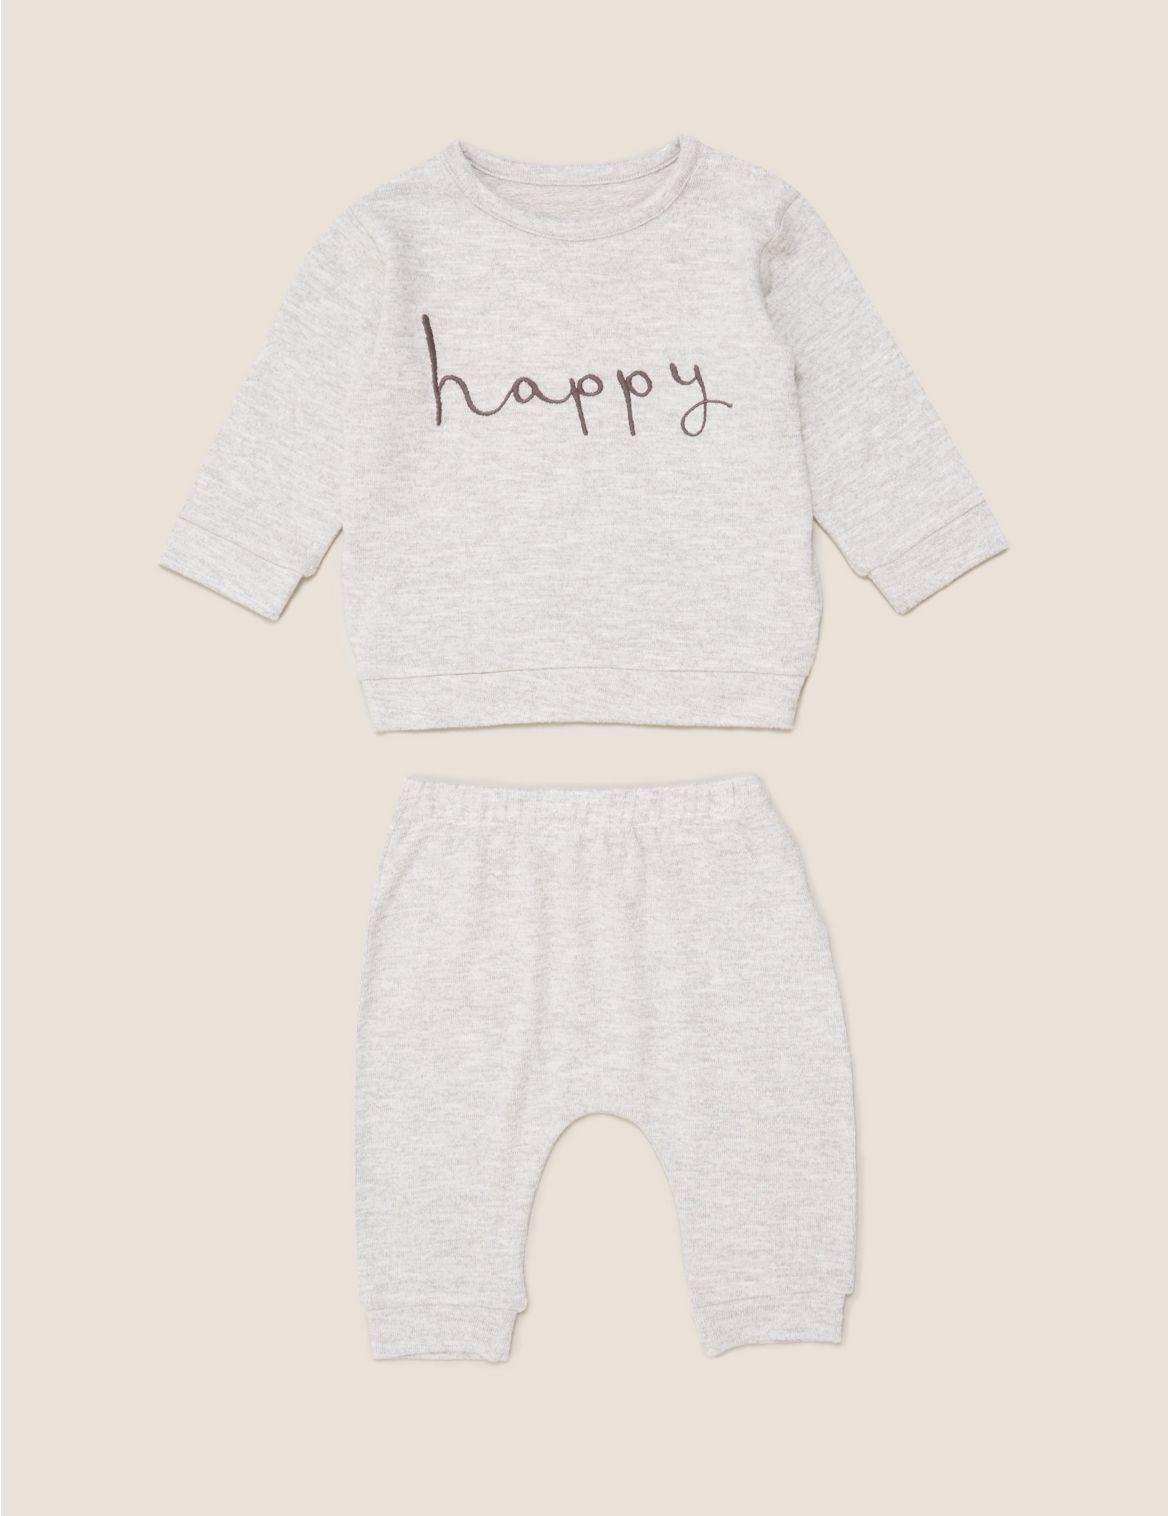 2 Piece Super Soft Happy Outfit (0-3 Yrs) grey